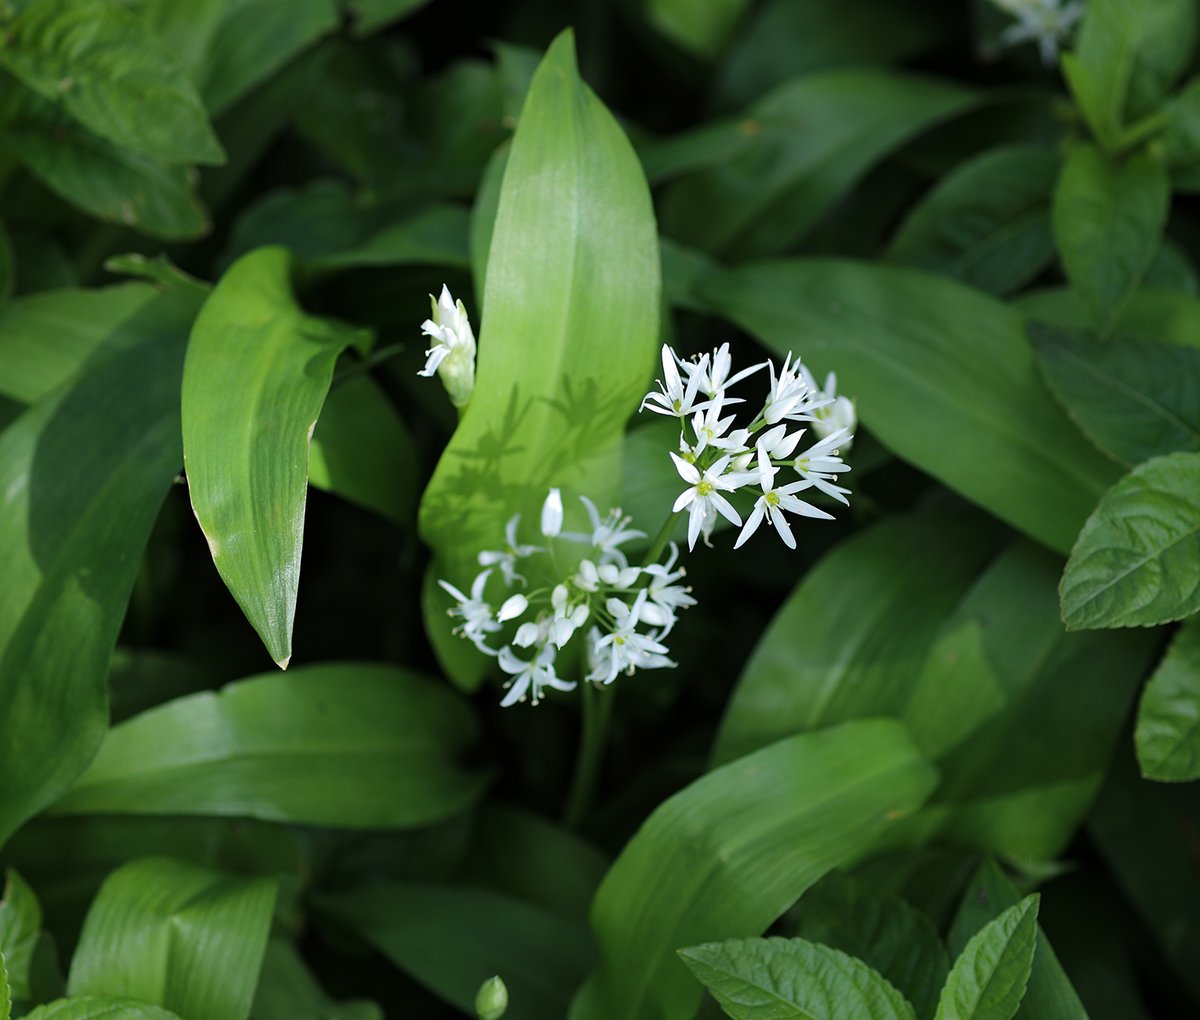 Our latest Limited Edition; see Wild Garlic in our gallery. We're open all weekend: Saturday - 10 to 4 Sunday - 2 to 4 Bank holiday Monday - 10 to 4